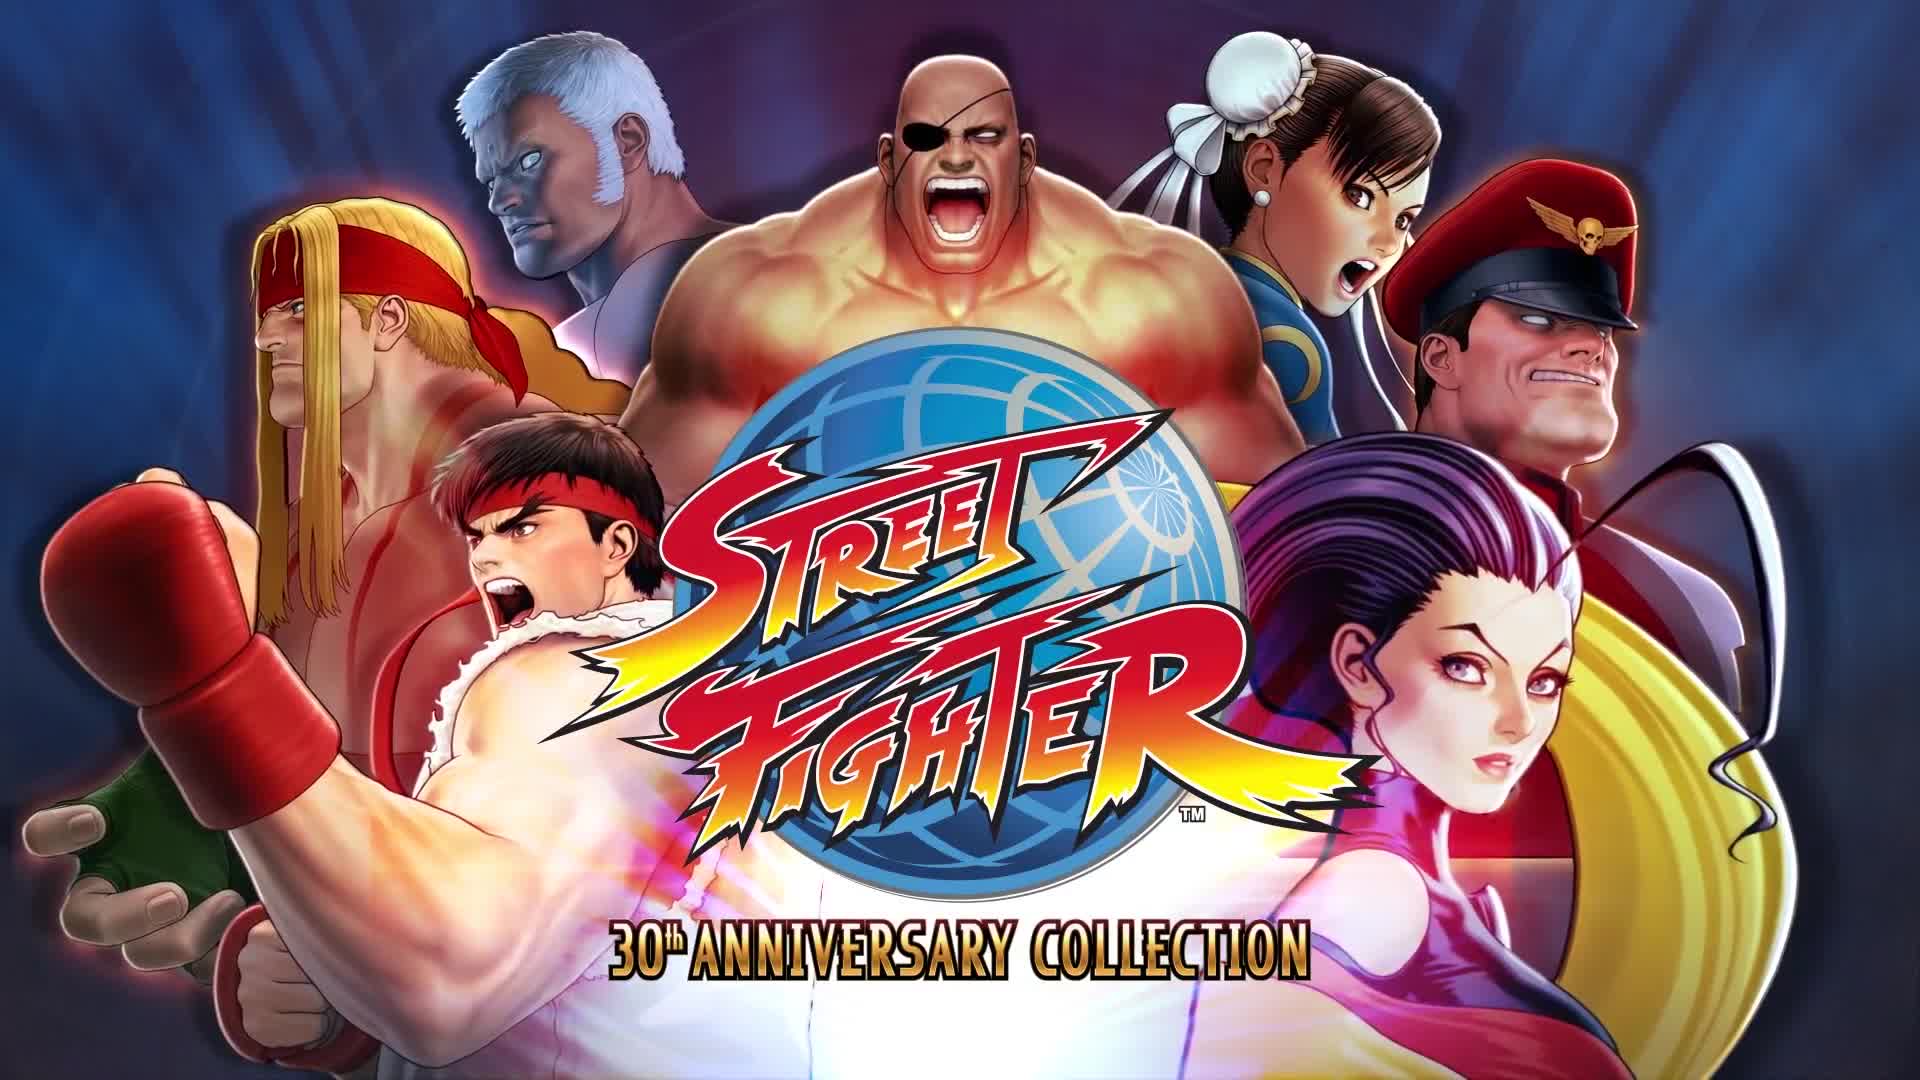 Street Fighter 30th Anniversary Collection - Launch Trailer